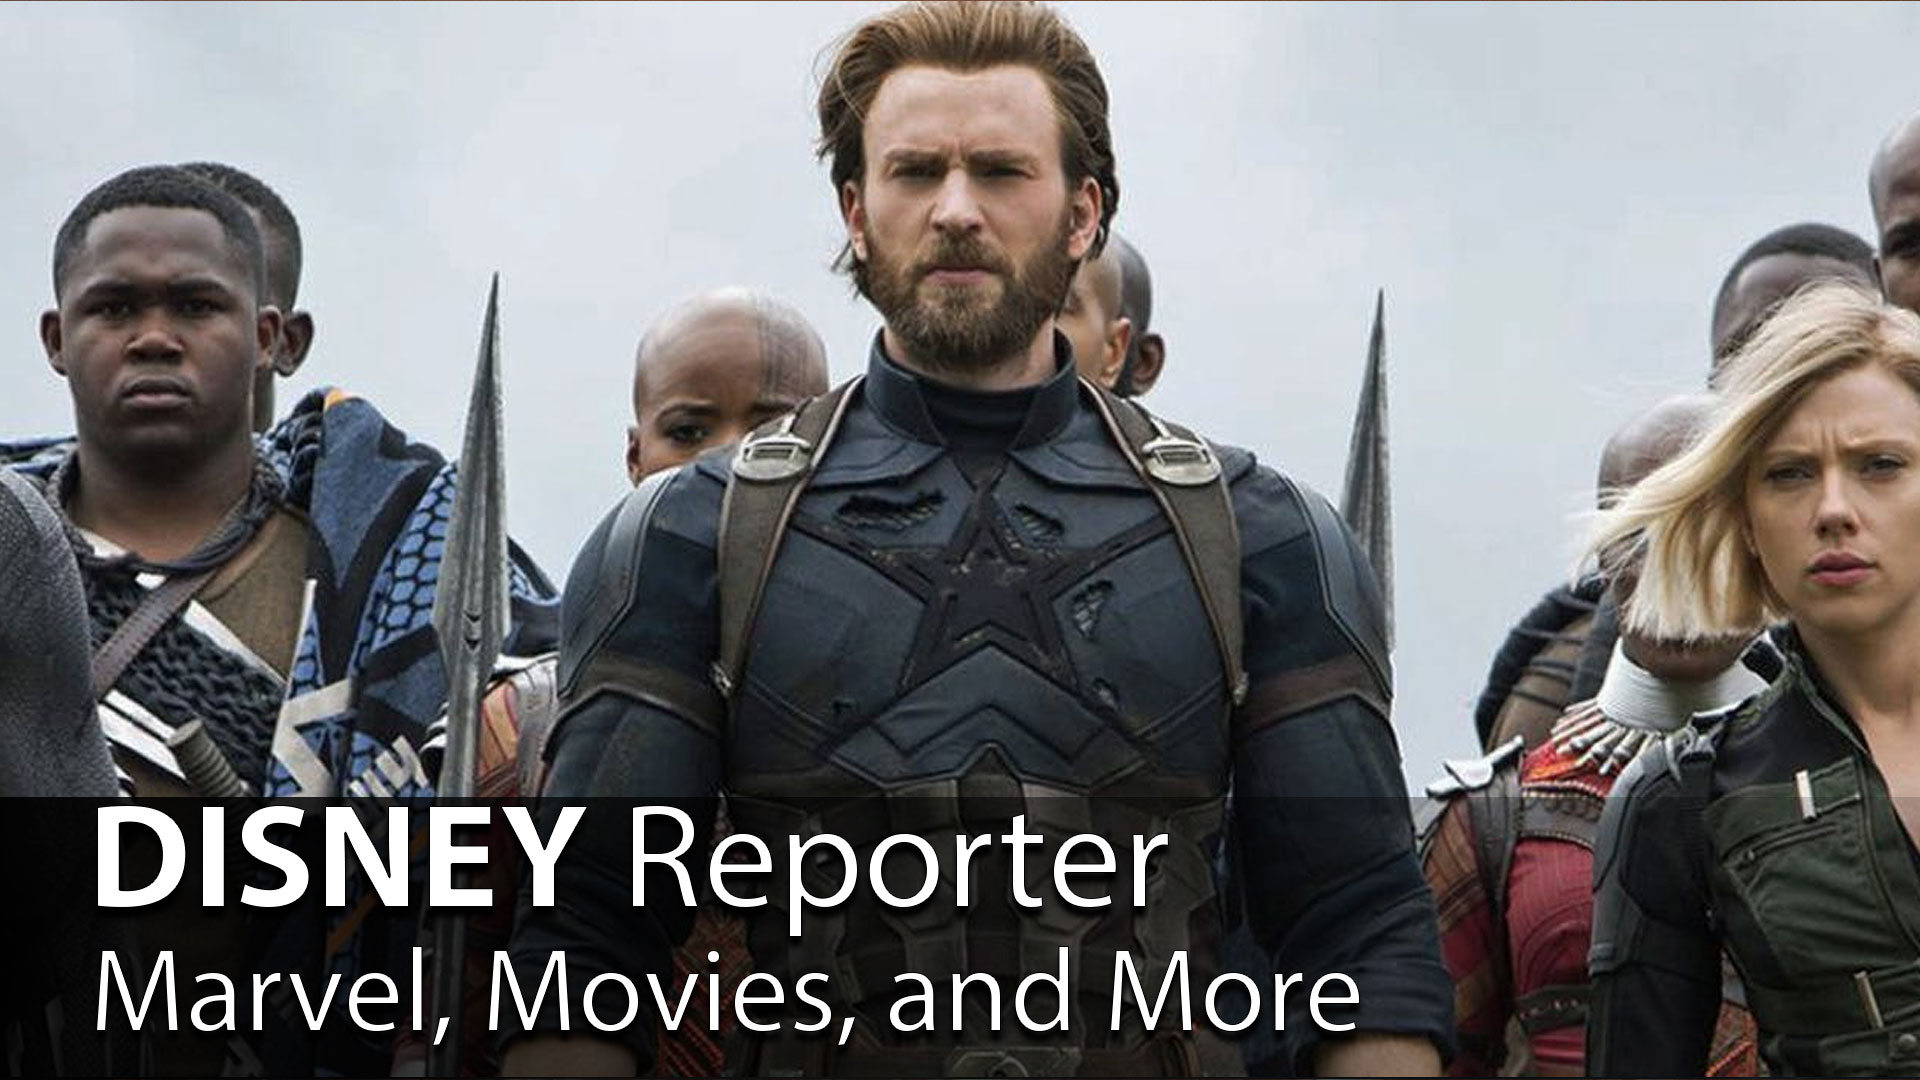 Marvel, Movies, and More – DISNEY Reporter